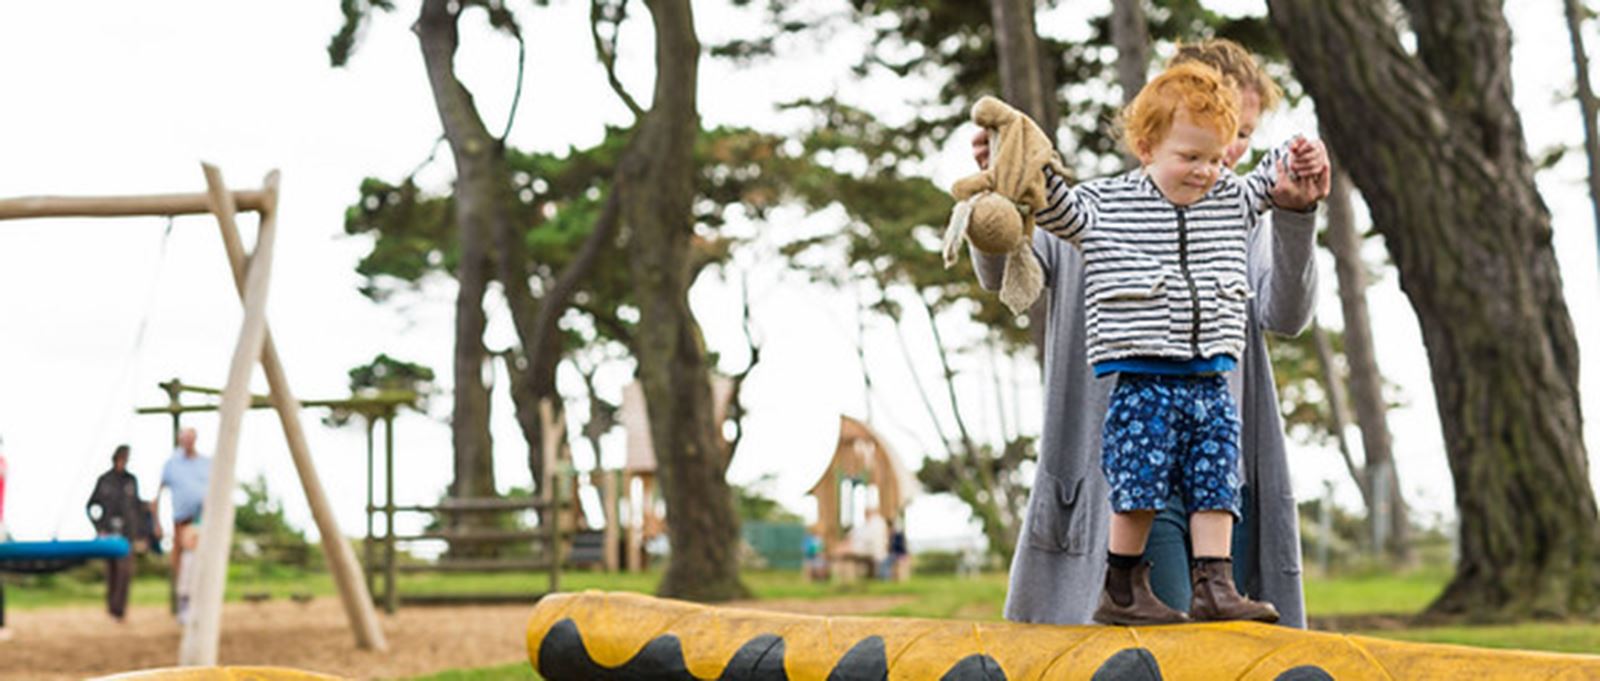 Lepe Country Park play area